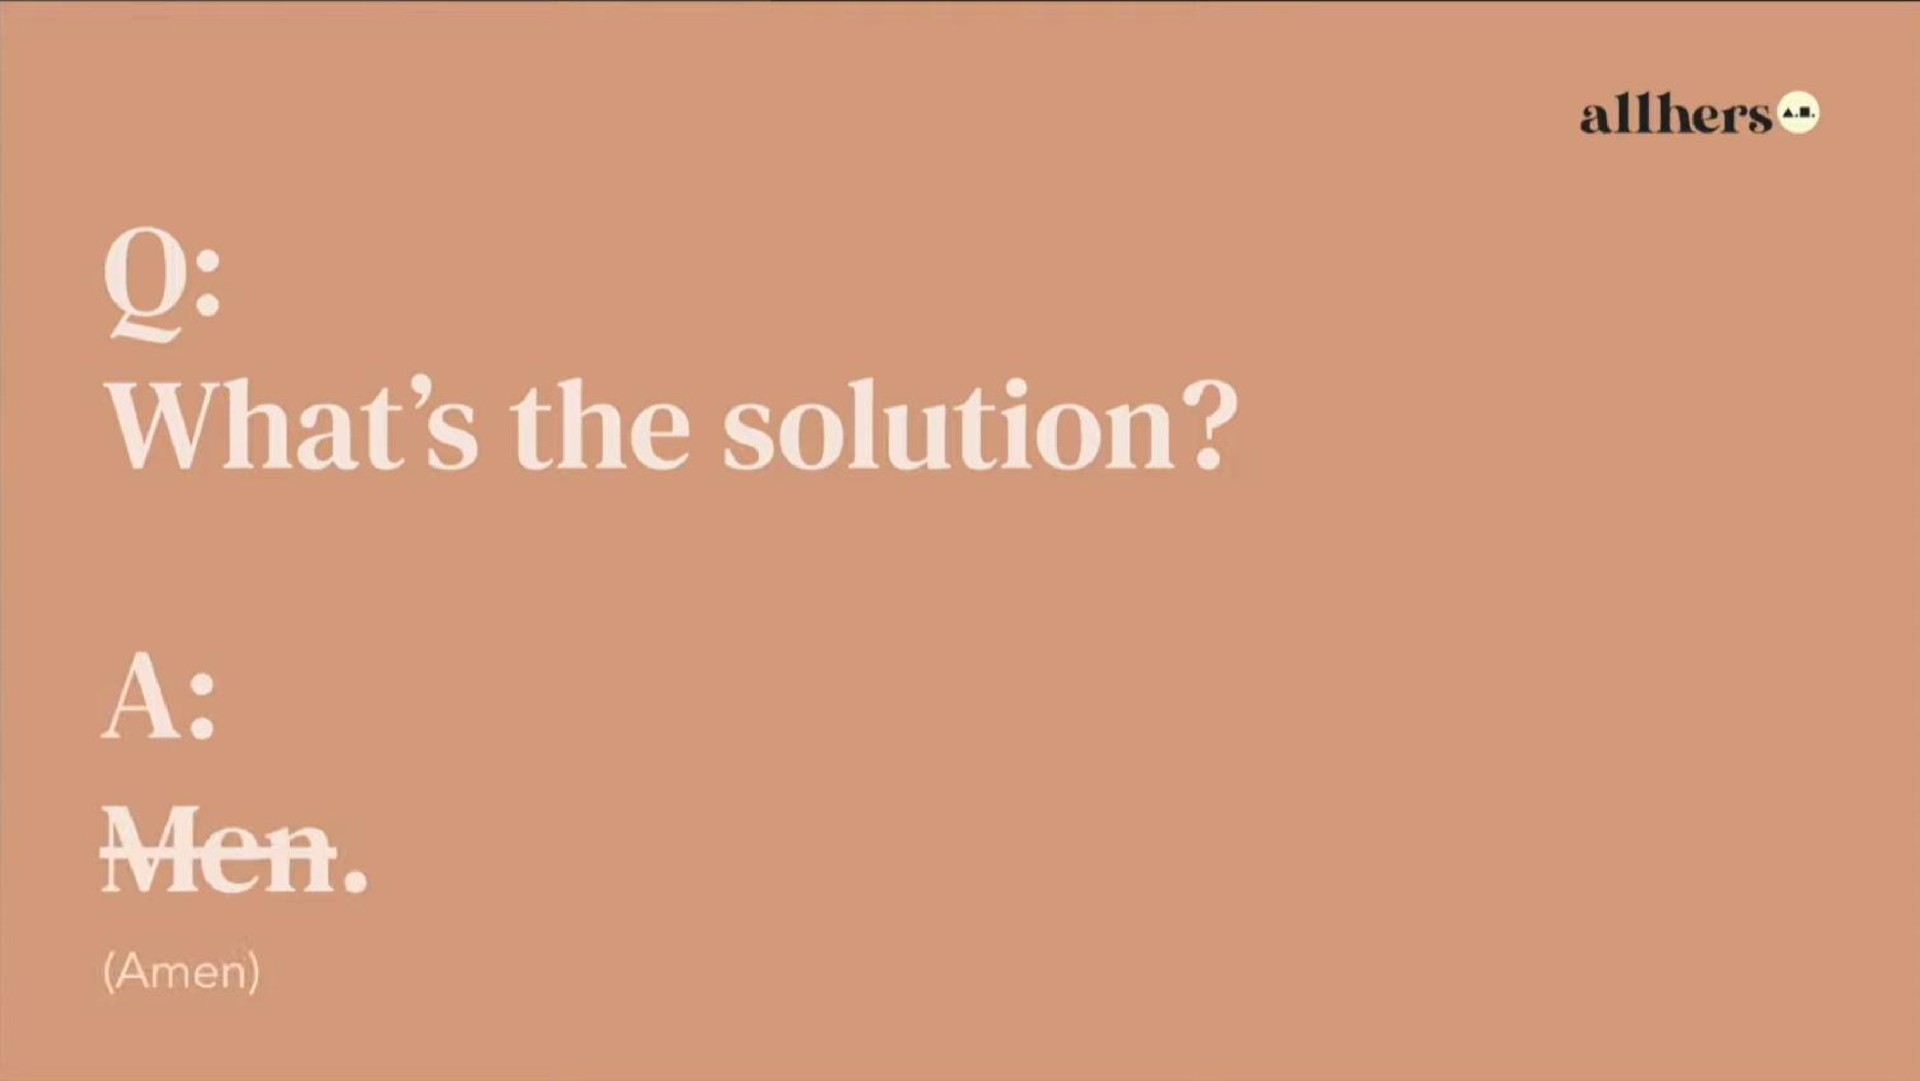 whats the solution | Allhers